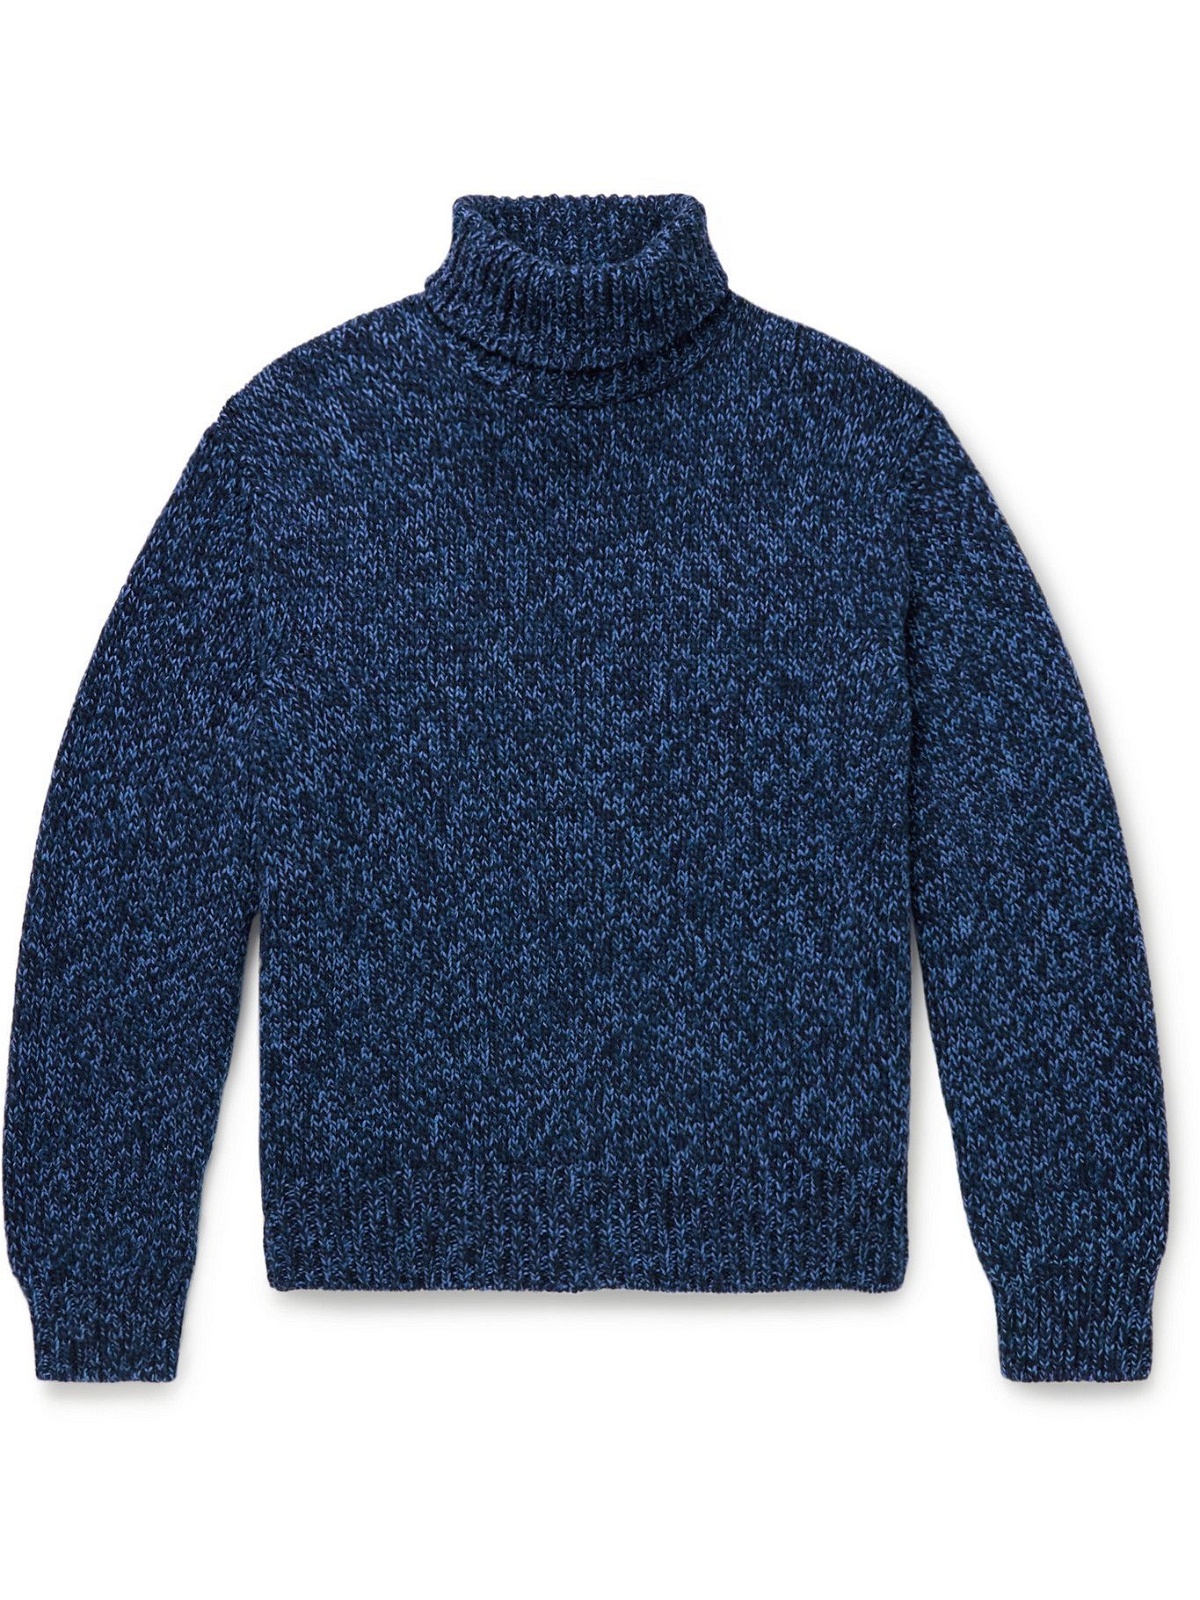 Mr P. - Recycled Cashmere and Wool-Blend Rollneck Sweater - Blue Mr P.